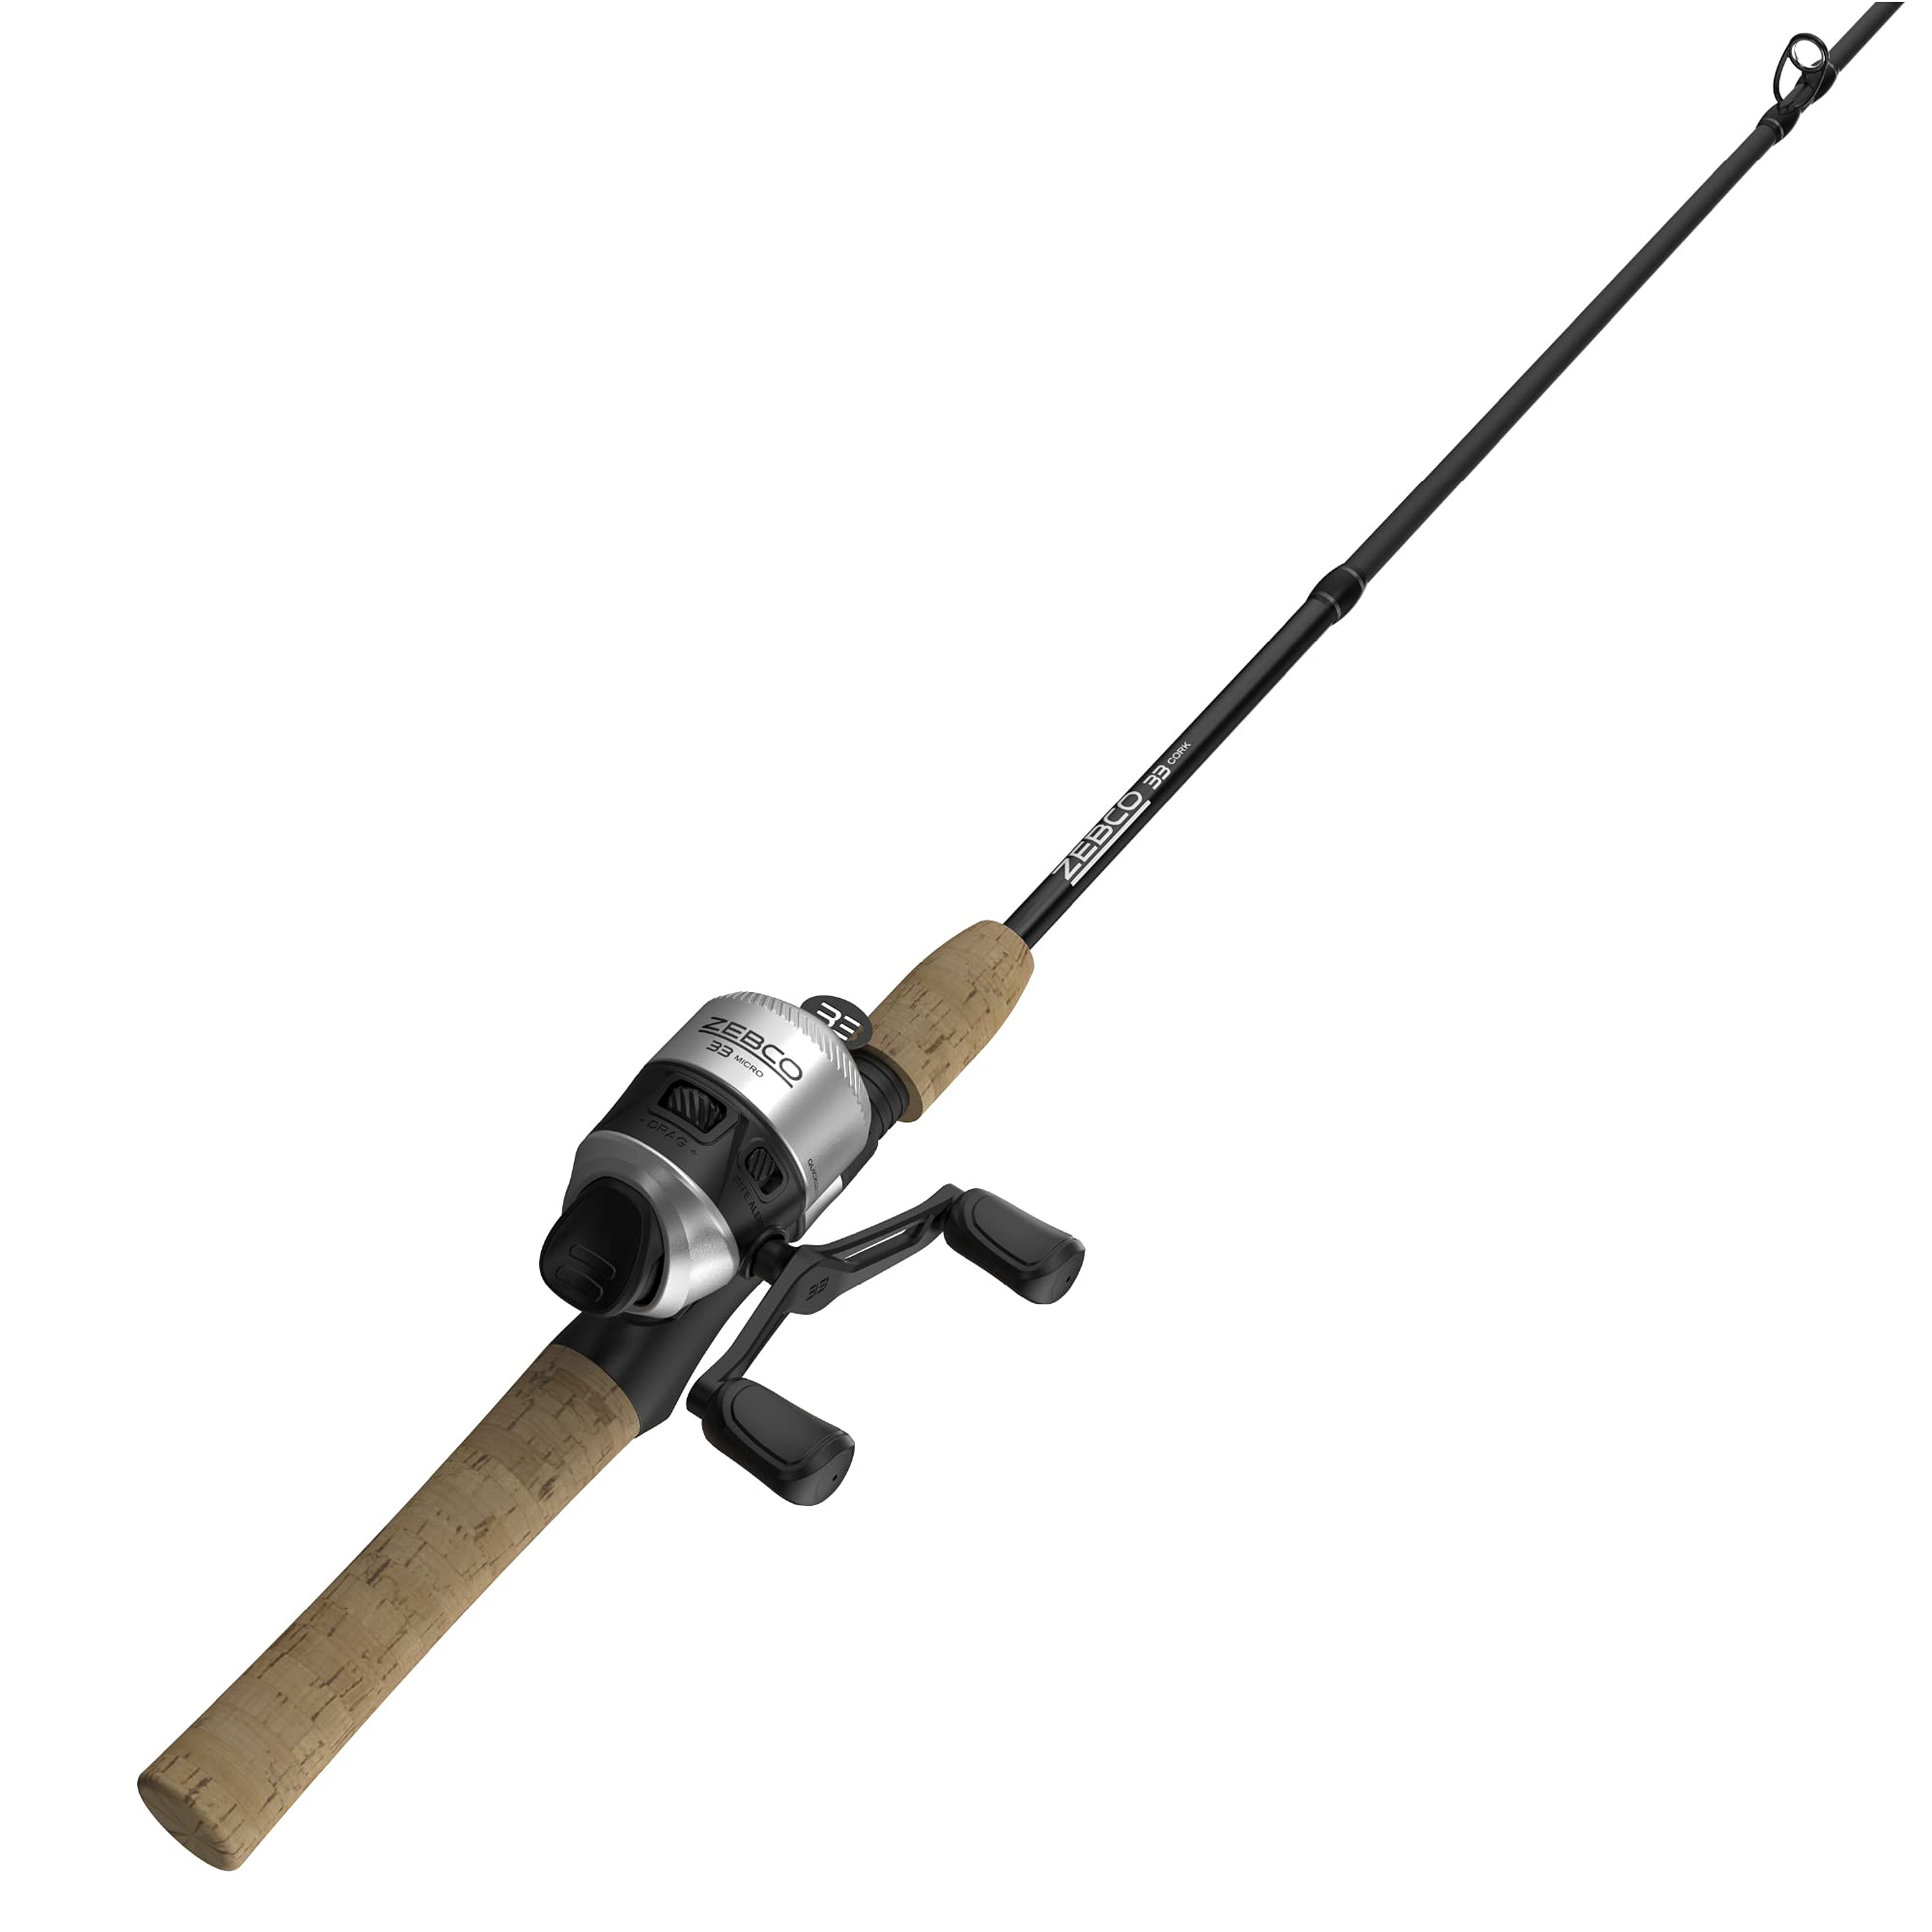 5'Zebco 33 Cork Micro Spincast Reel and 2-Piece Fishing Rod Combo (Black) $18.87 + Free Shipping w/ Prime or on $35+